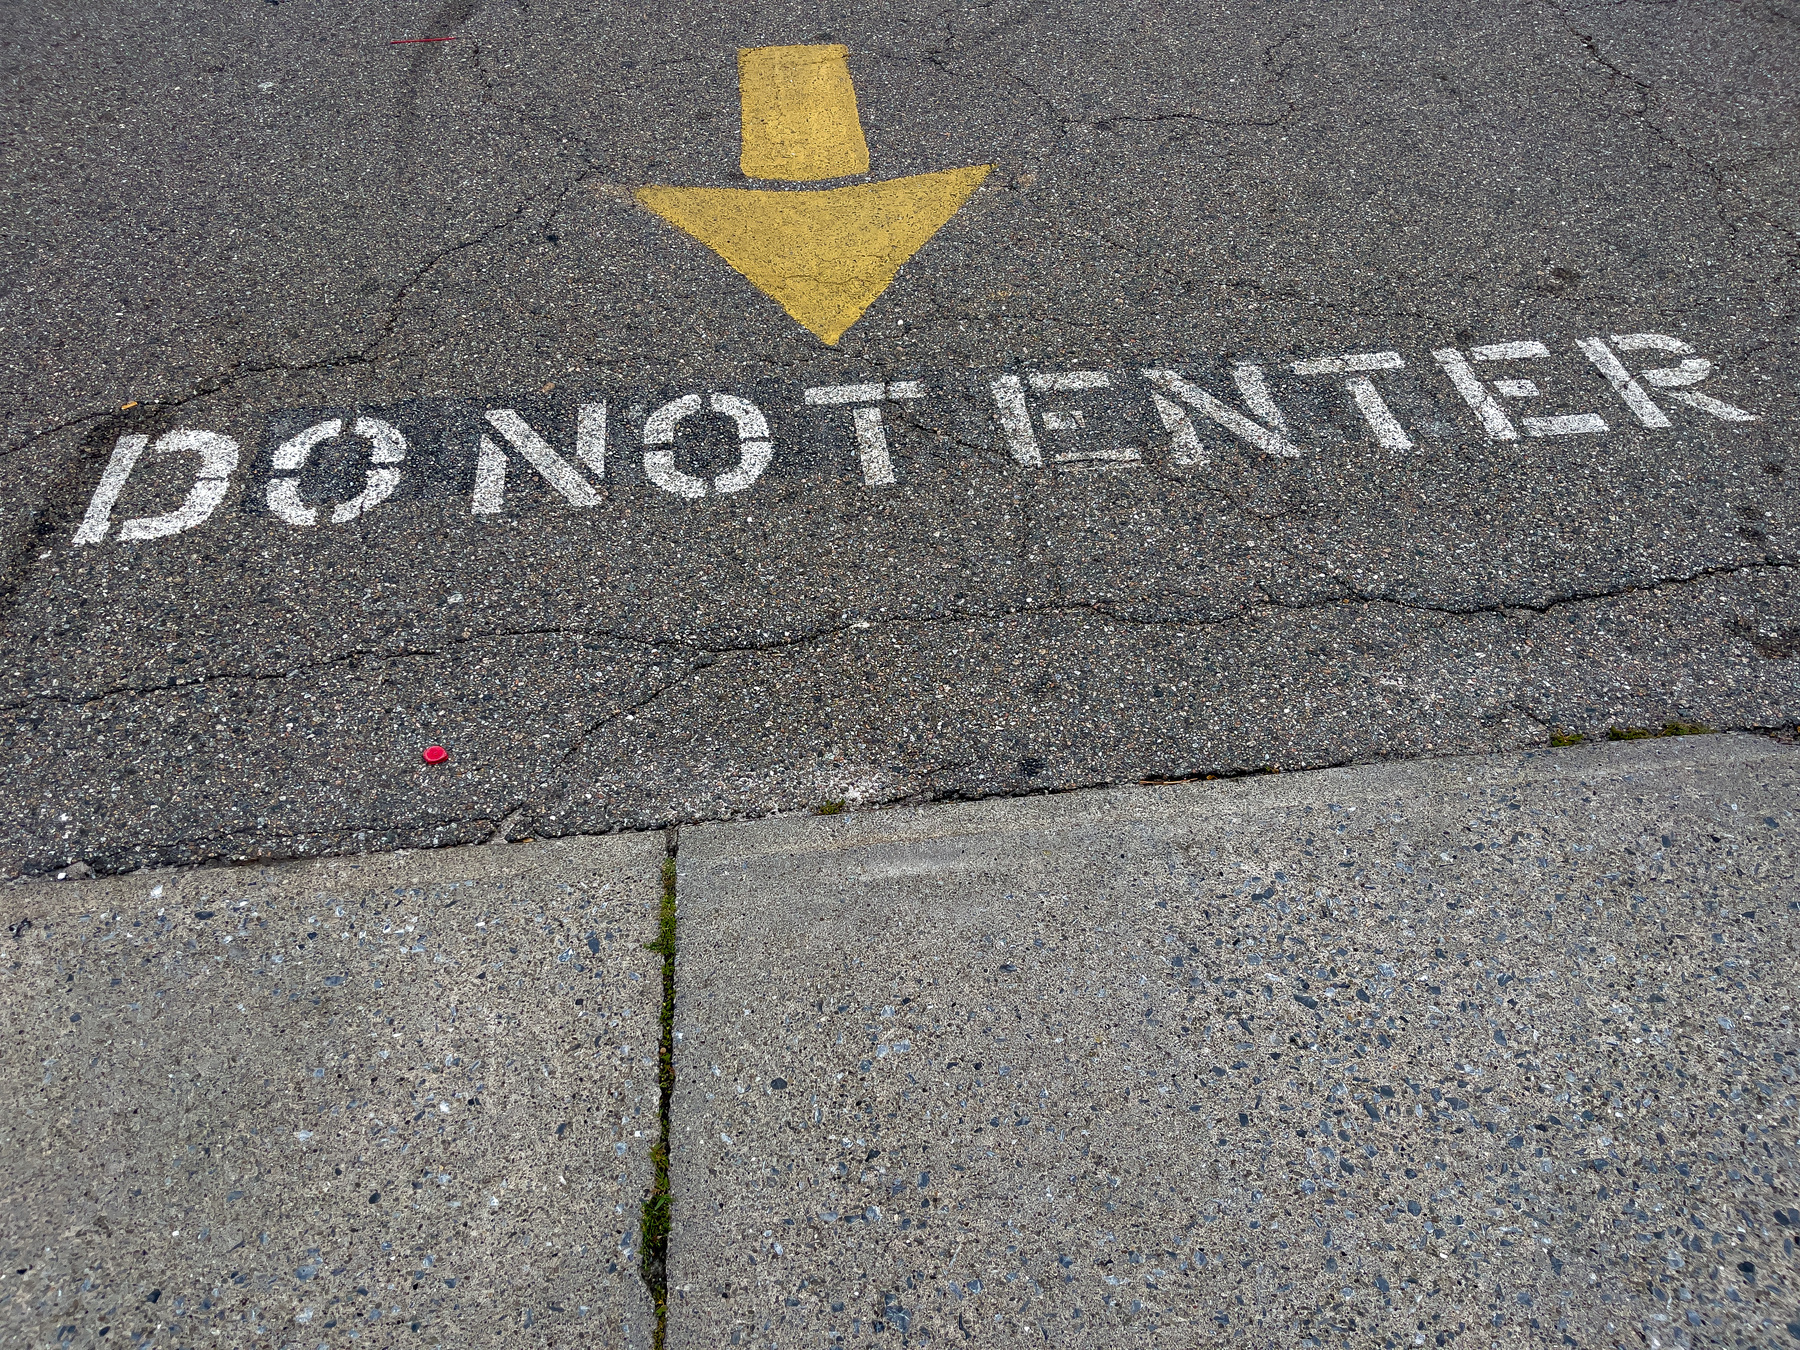 Yellow arrow painted on asphalt parking lot in middle top of frame pointing towards the bottom of the frame with the words “DO NOT ENTER” painted in white below the tip of the arrow.